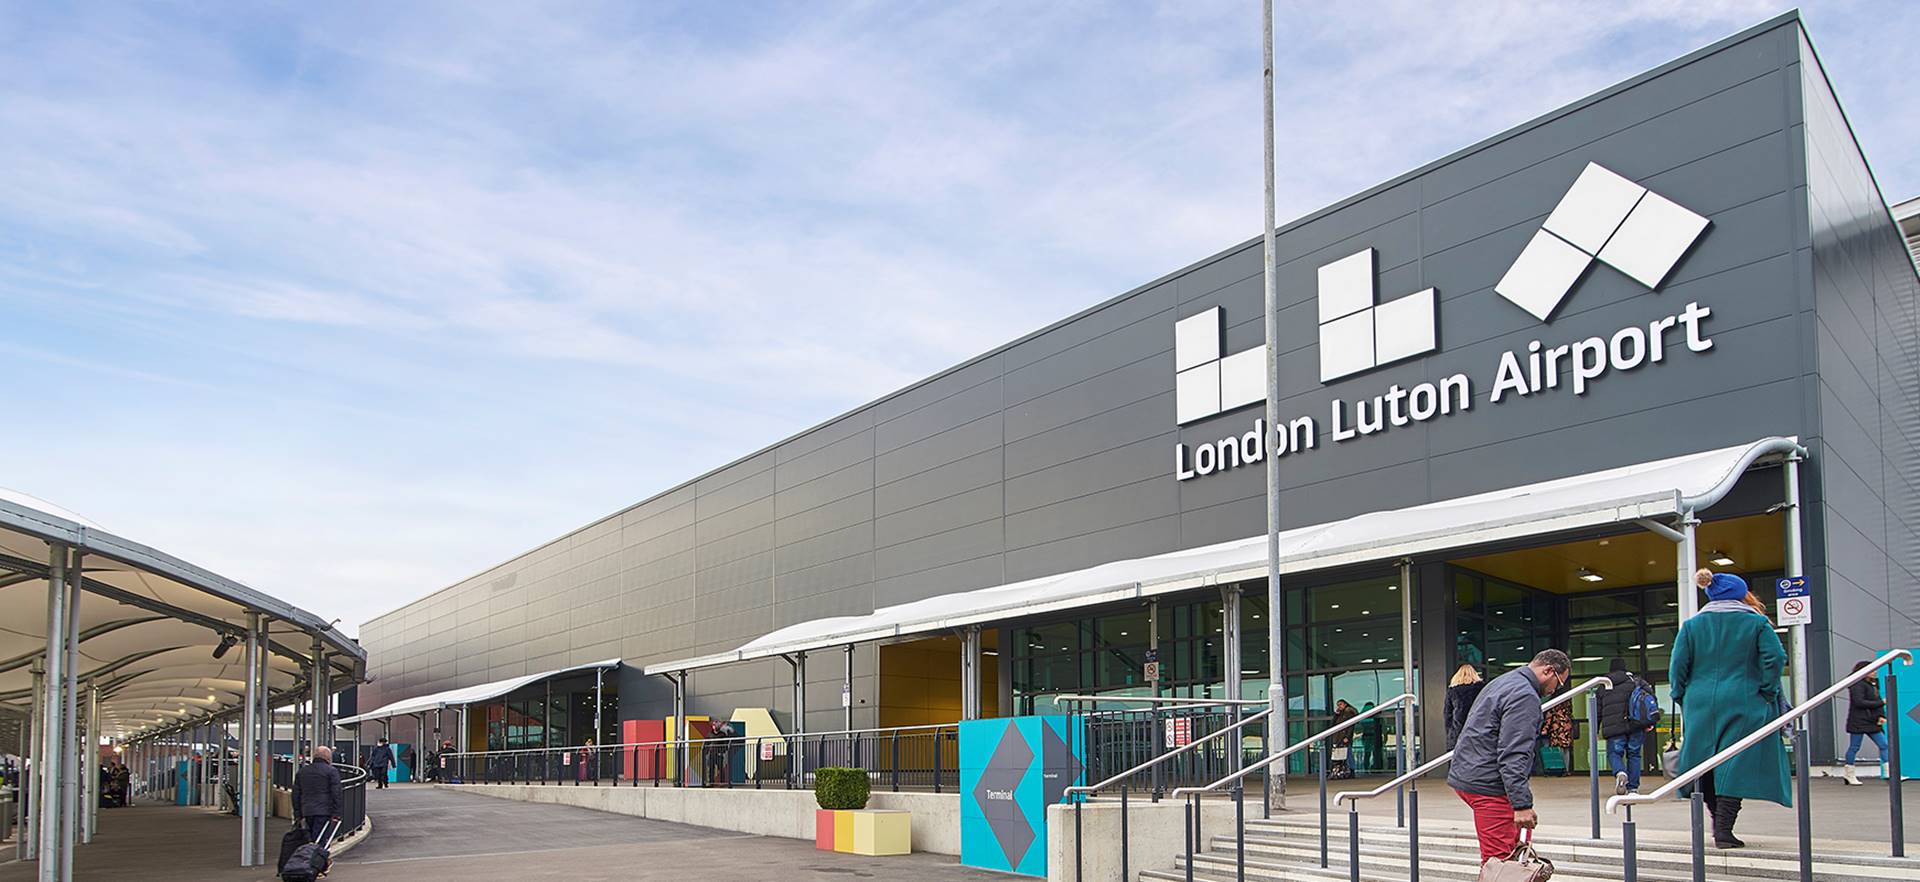 Skies Your Ultimate Guide to Luton Airport Pick Up Excellence